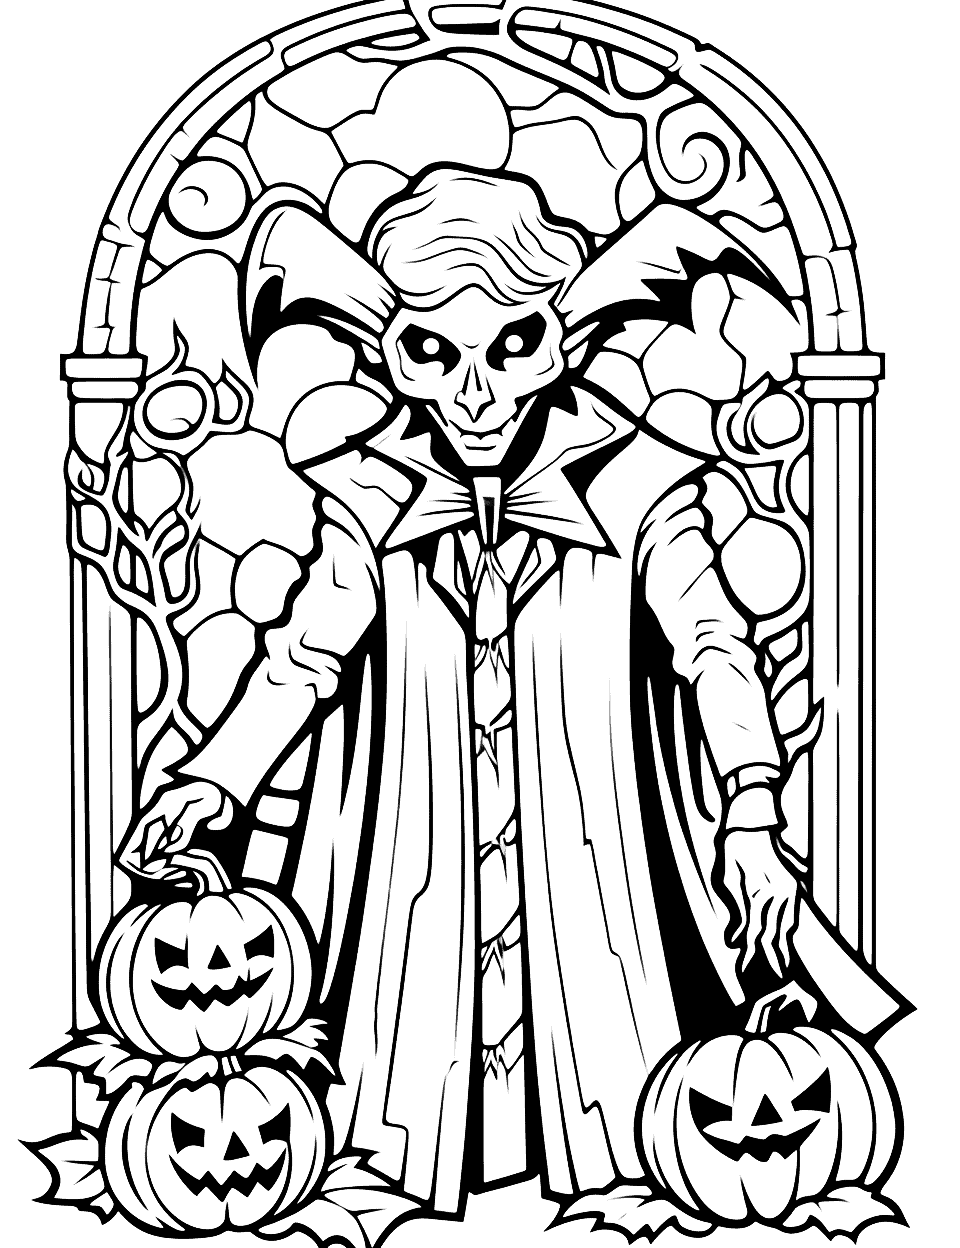 Gothic Vampire Scene Halloween Coloring Page - A more complex and detailed image of a vampire in a gothic setting, perfect for older kids.